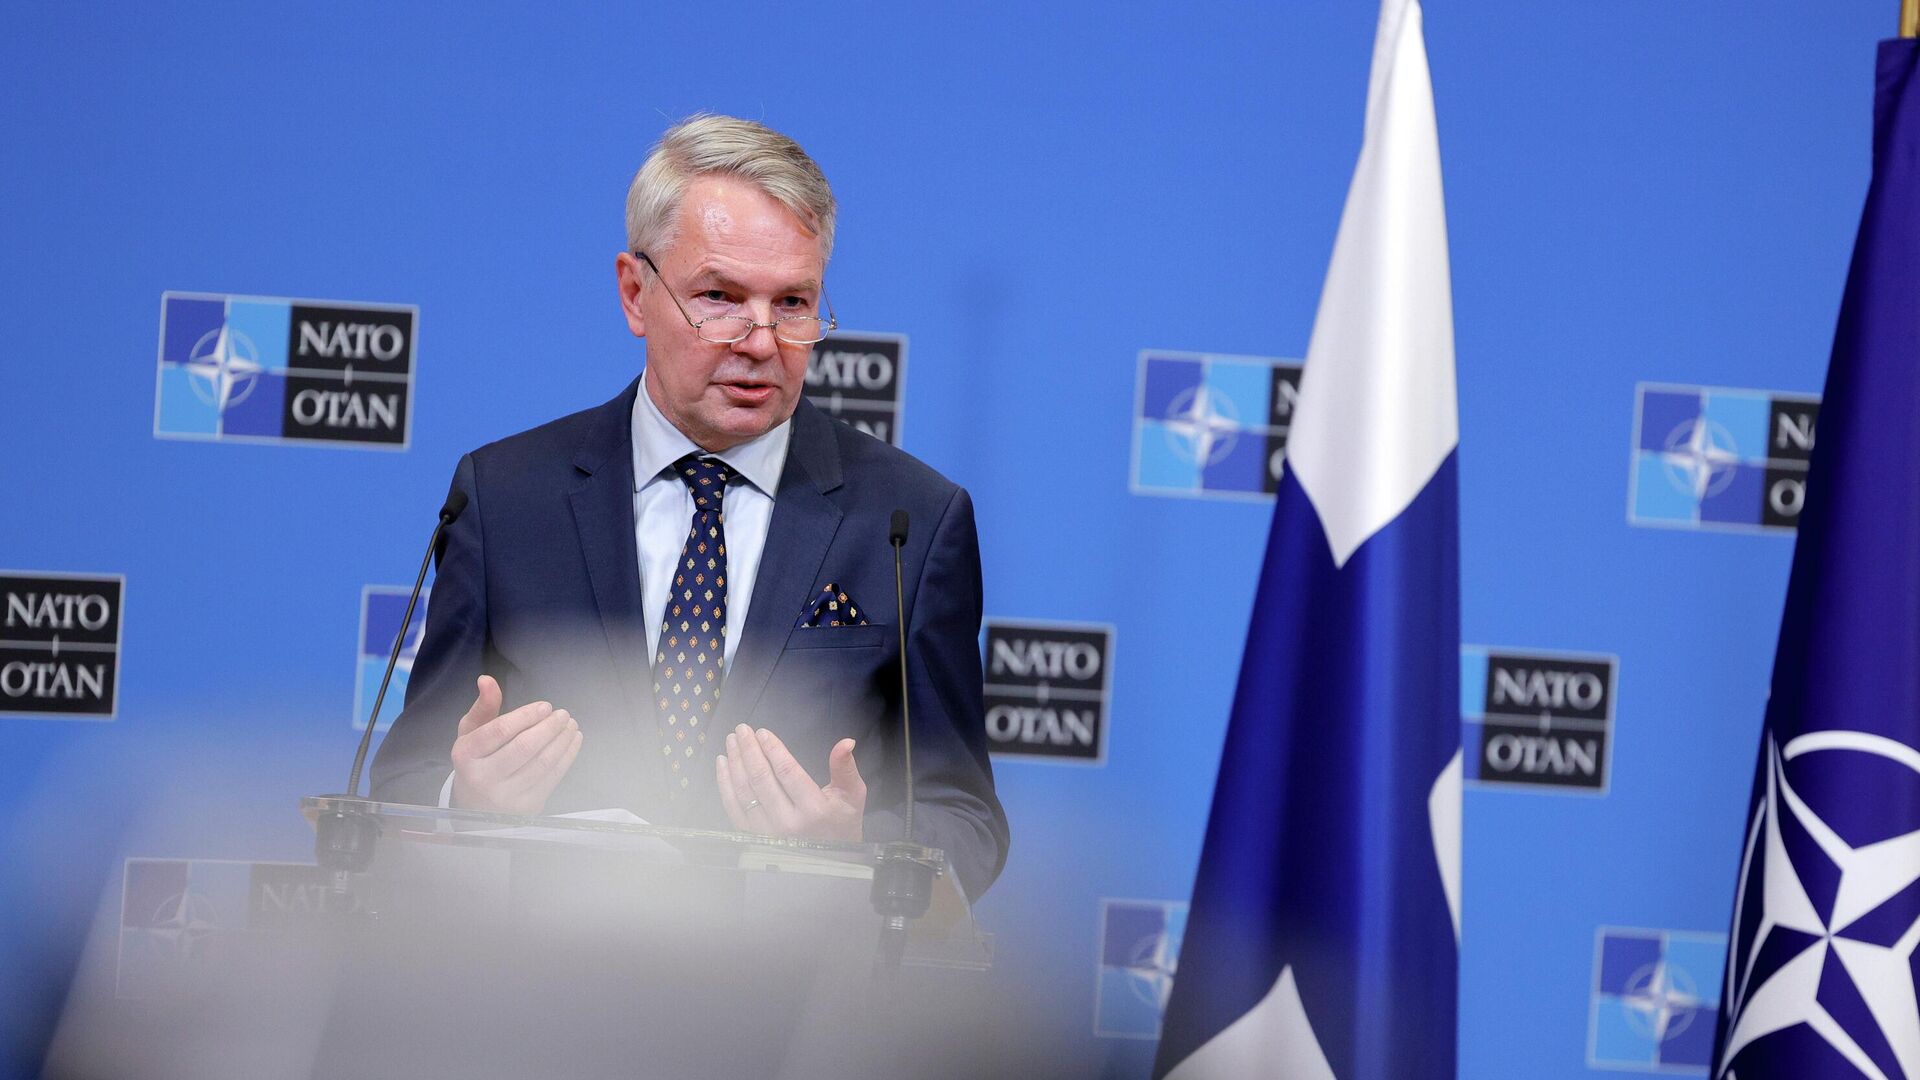 Finland's Foreign Minister Pekka Haavisto speaks during a media conference at NATO headquarters in Brussels, Monday, Jan. 24, 2022. - Sputnik International, 1920, 06.06.2022